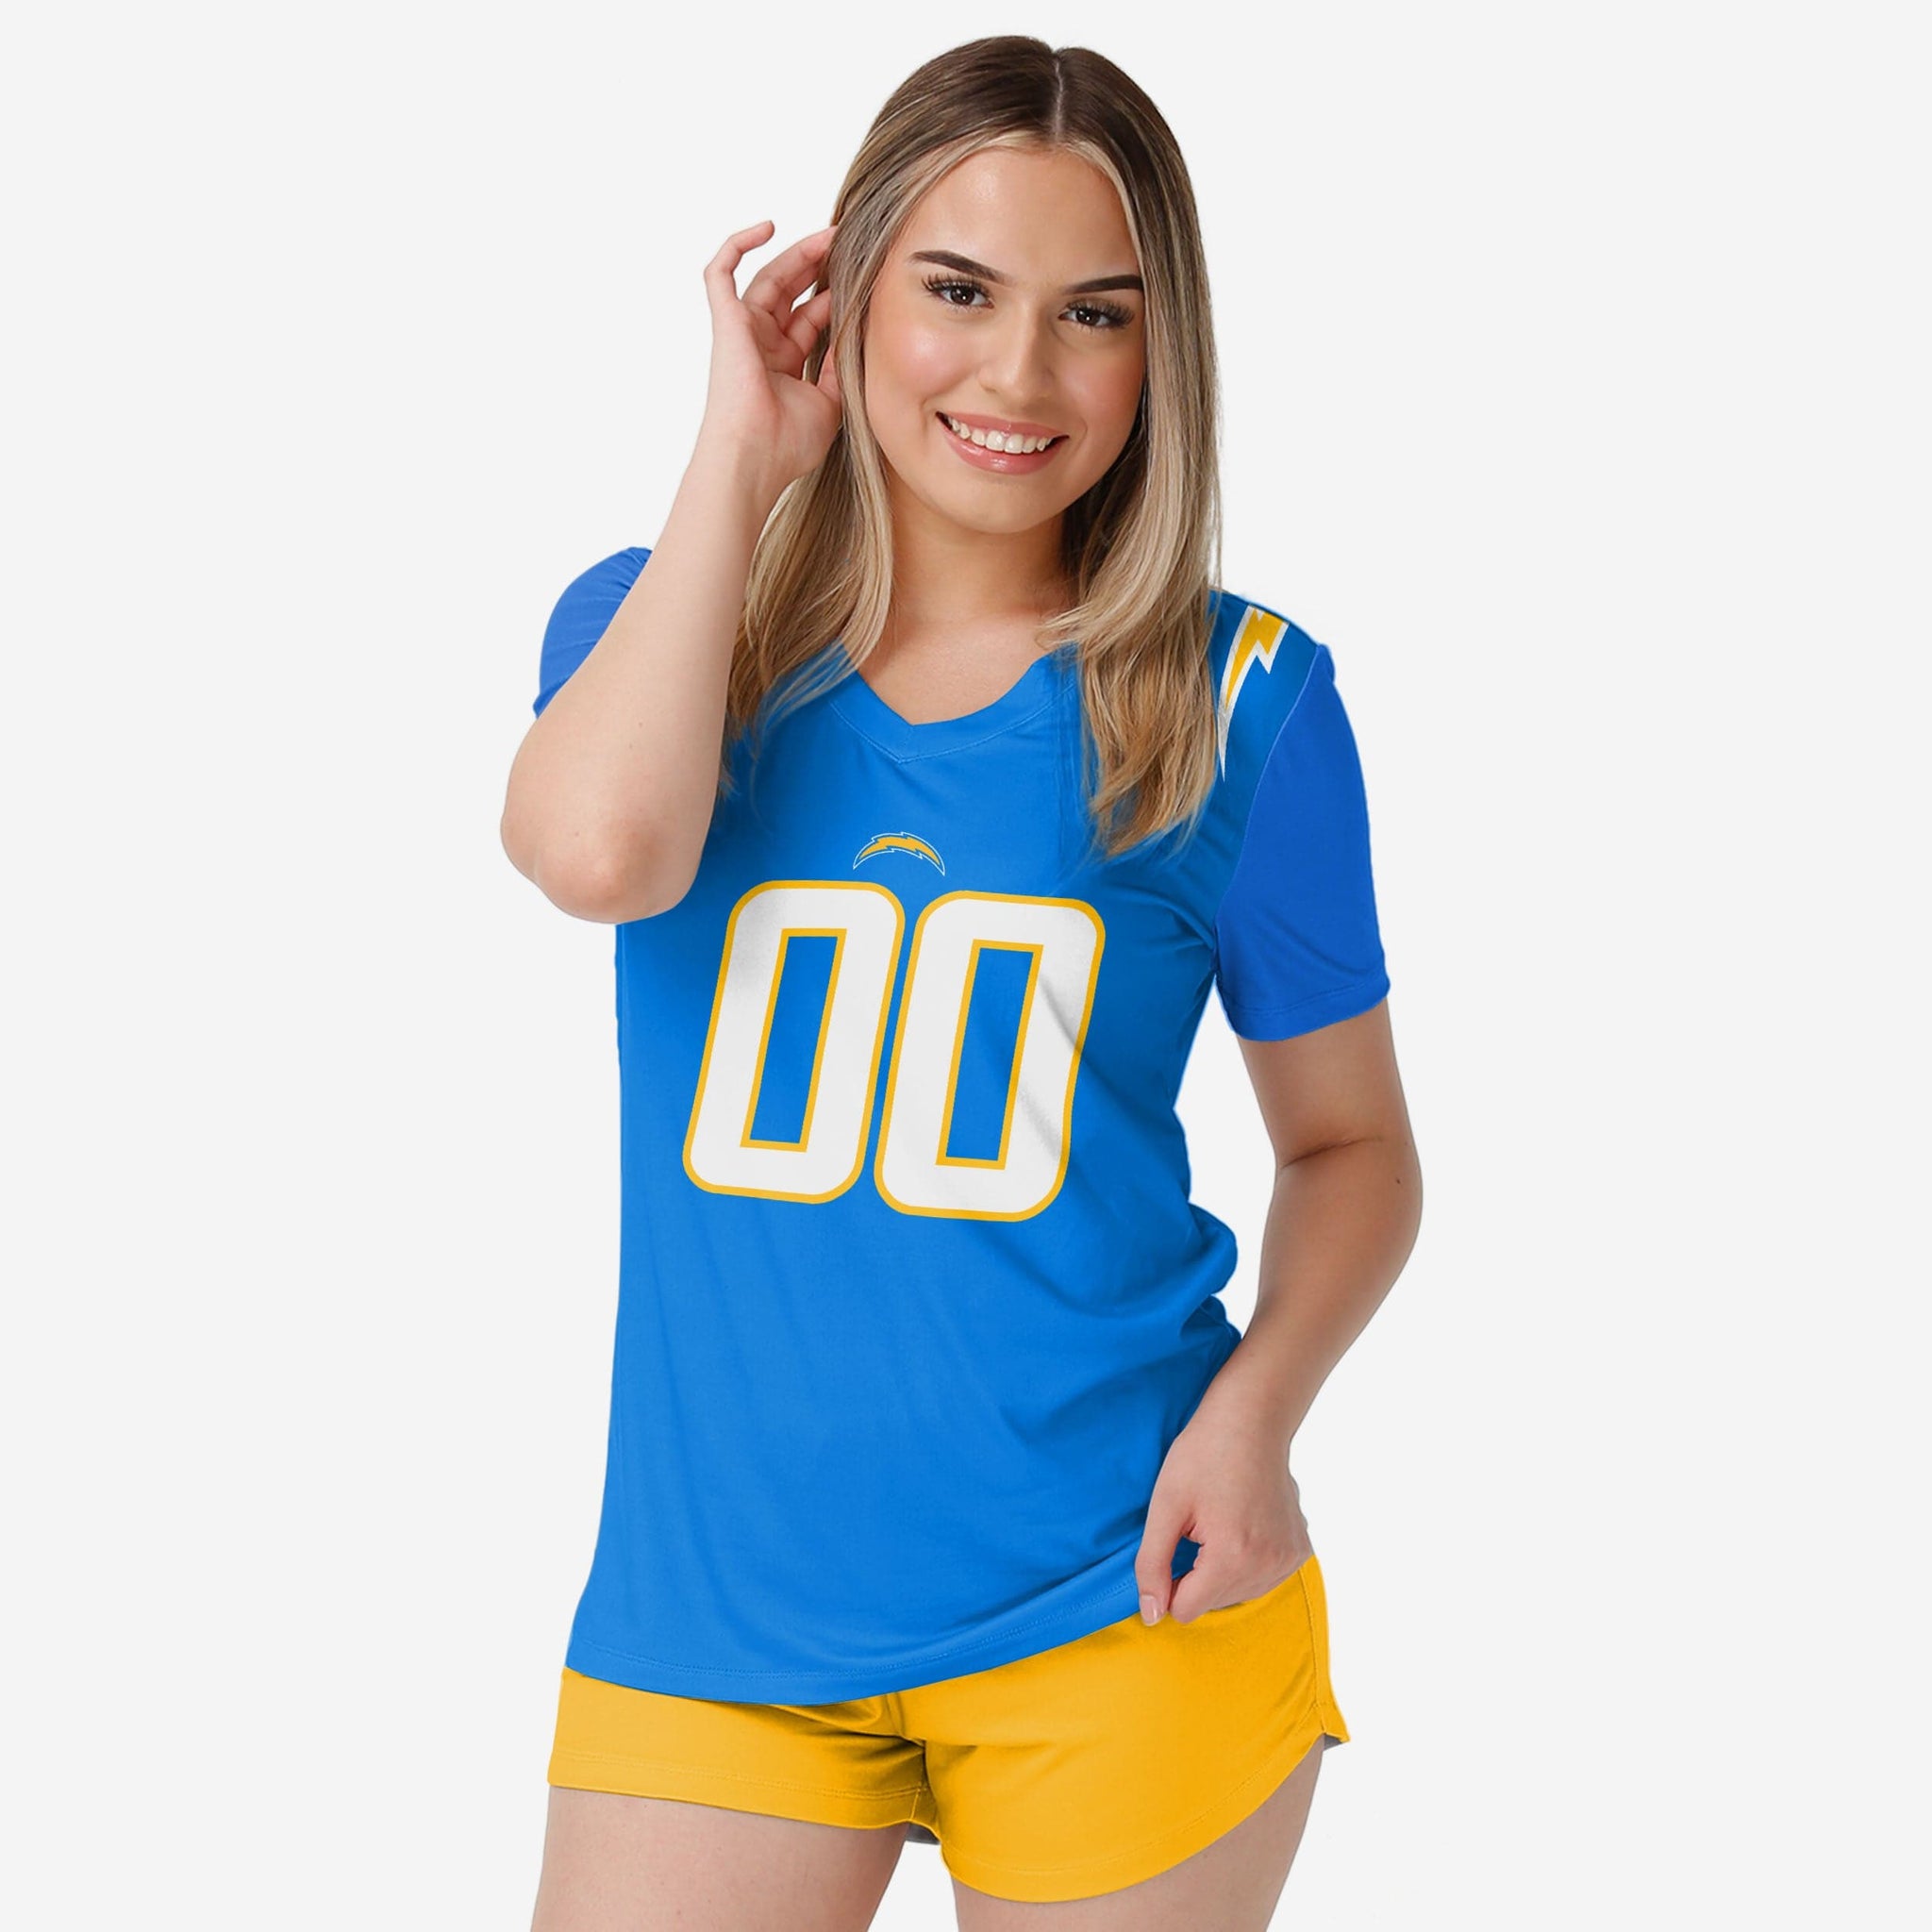 Los Angeles Chargers Apparel, Collectibles, and Fan Gear. FOCO